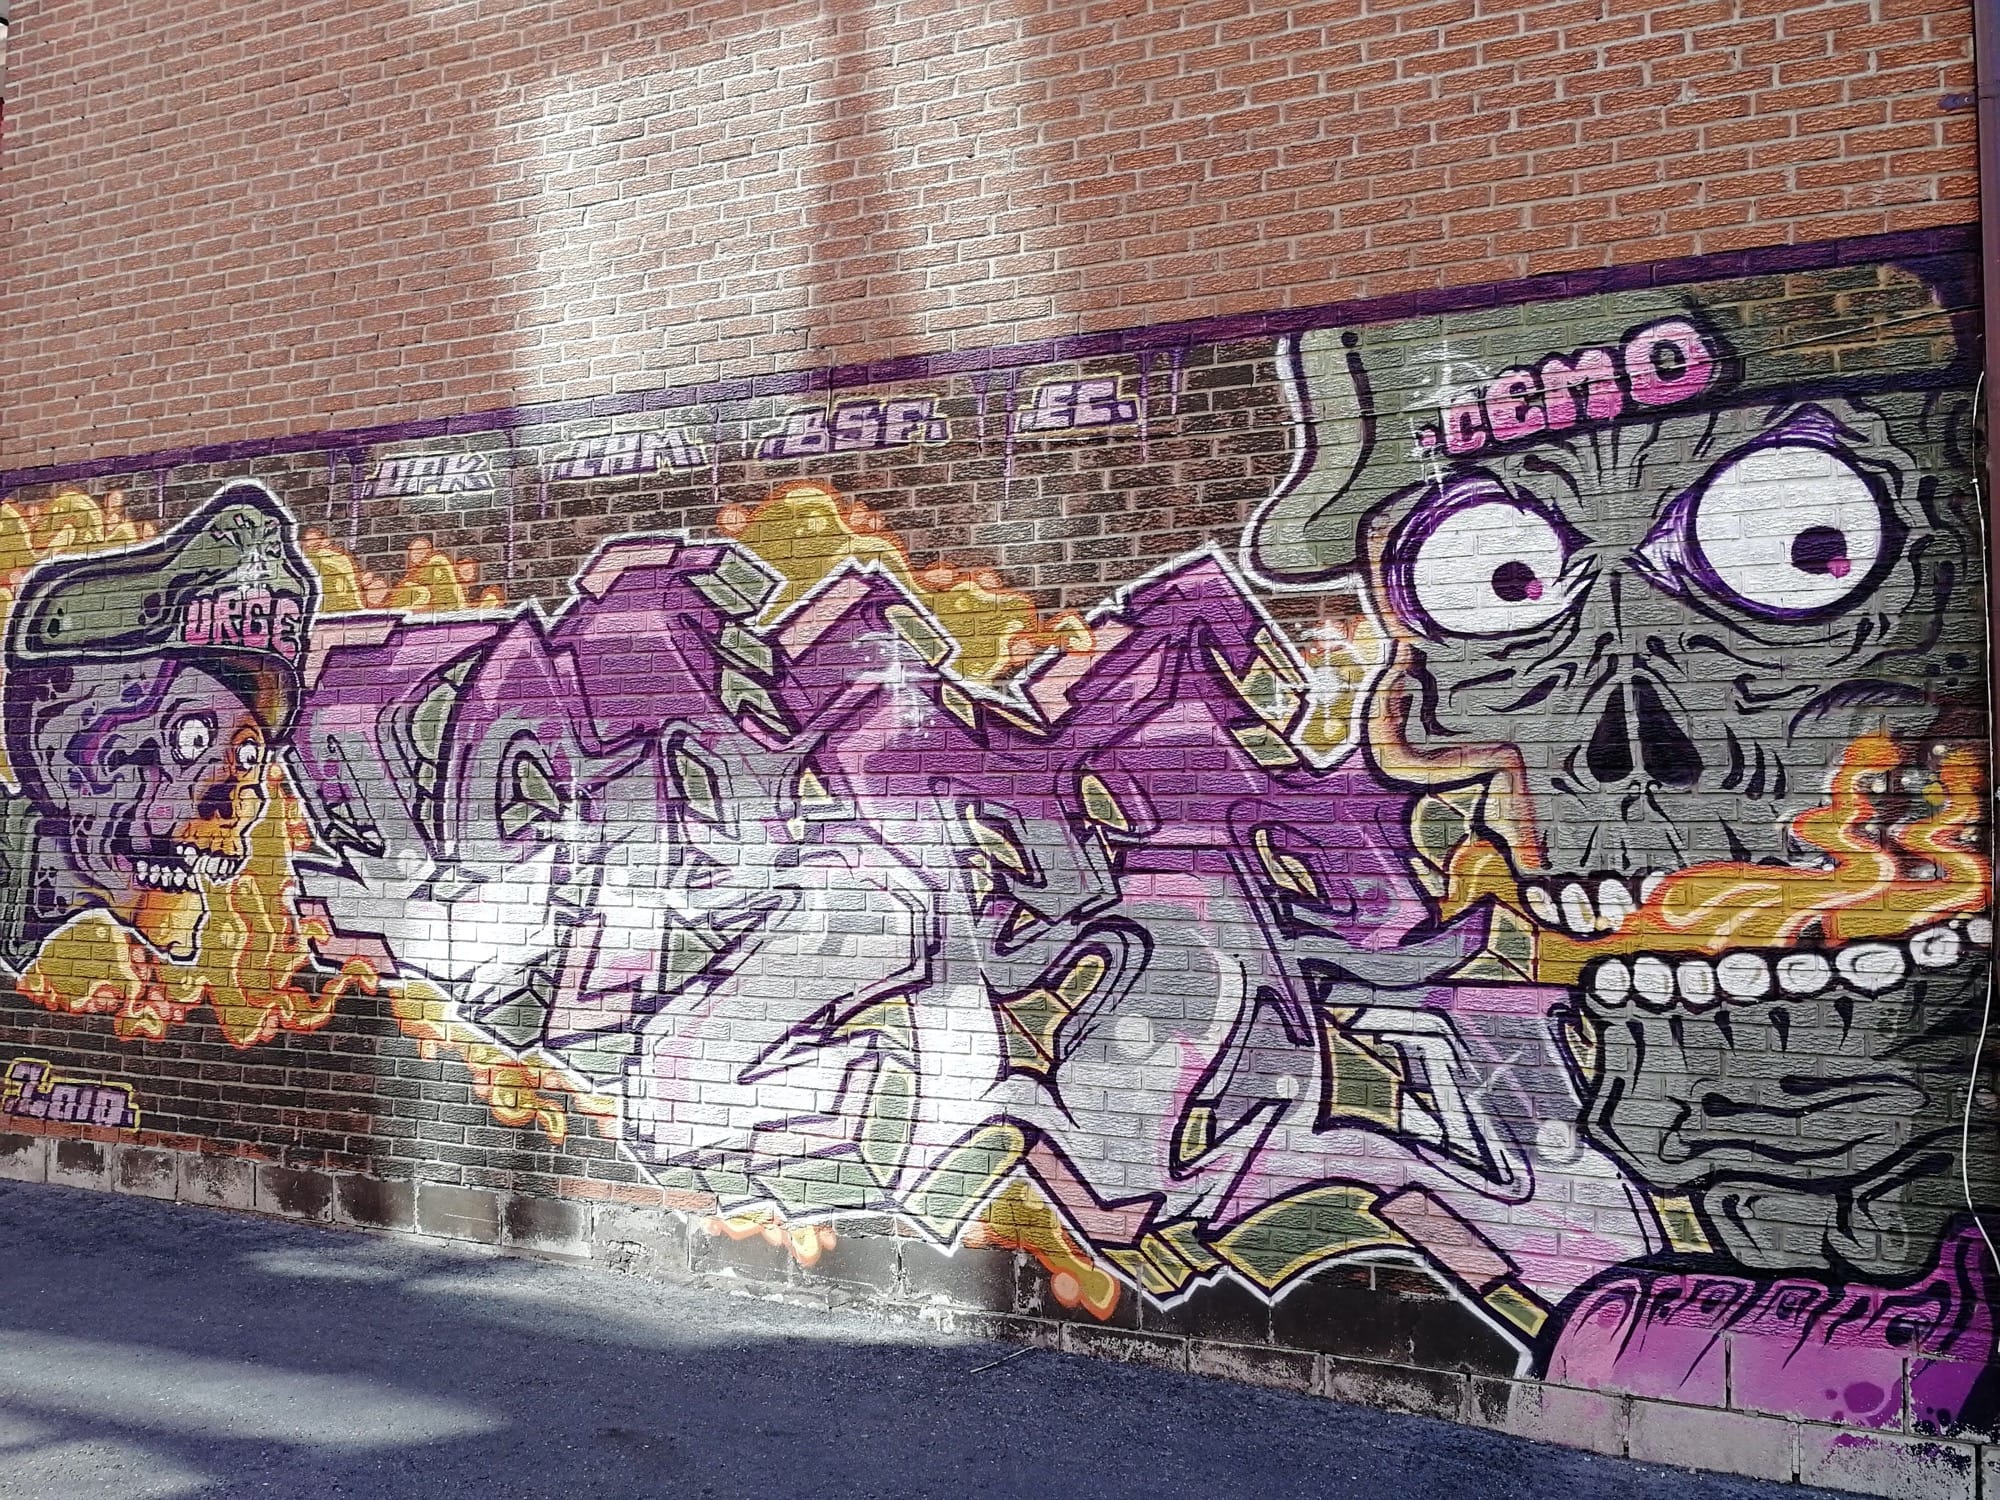 Graffiti 2487  captured by Rabot in Toronto Canada